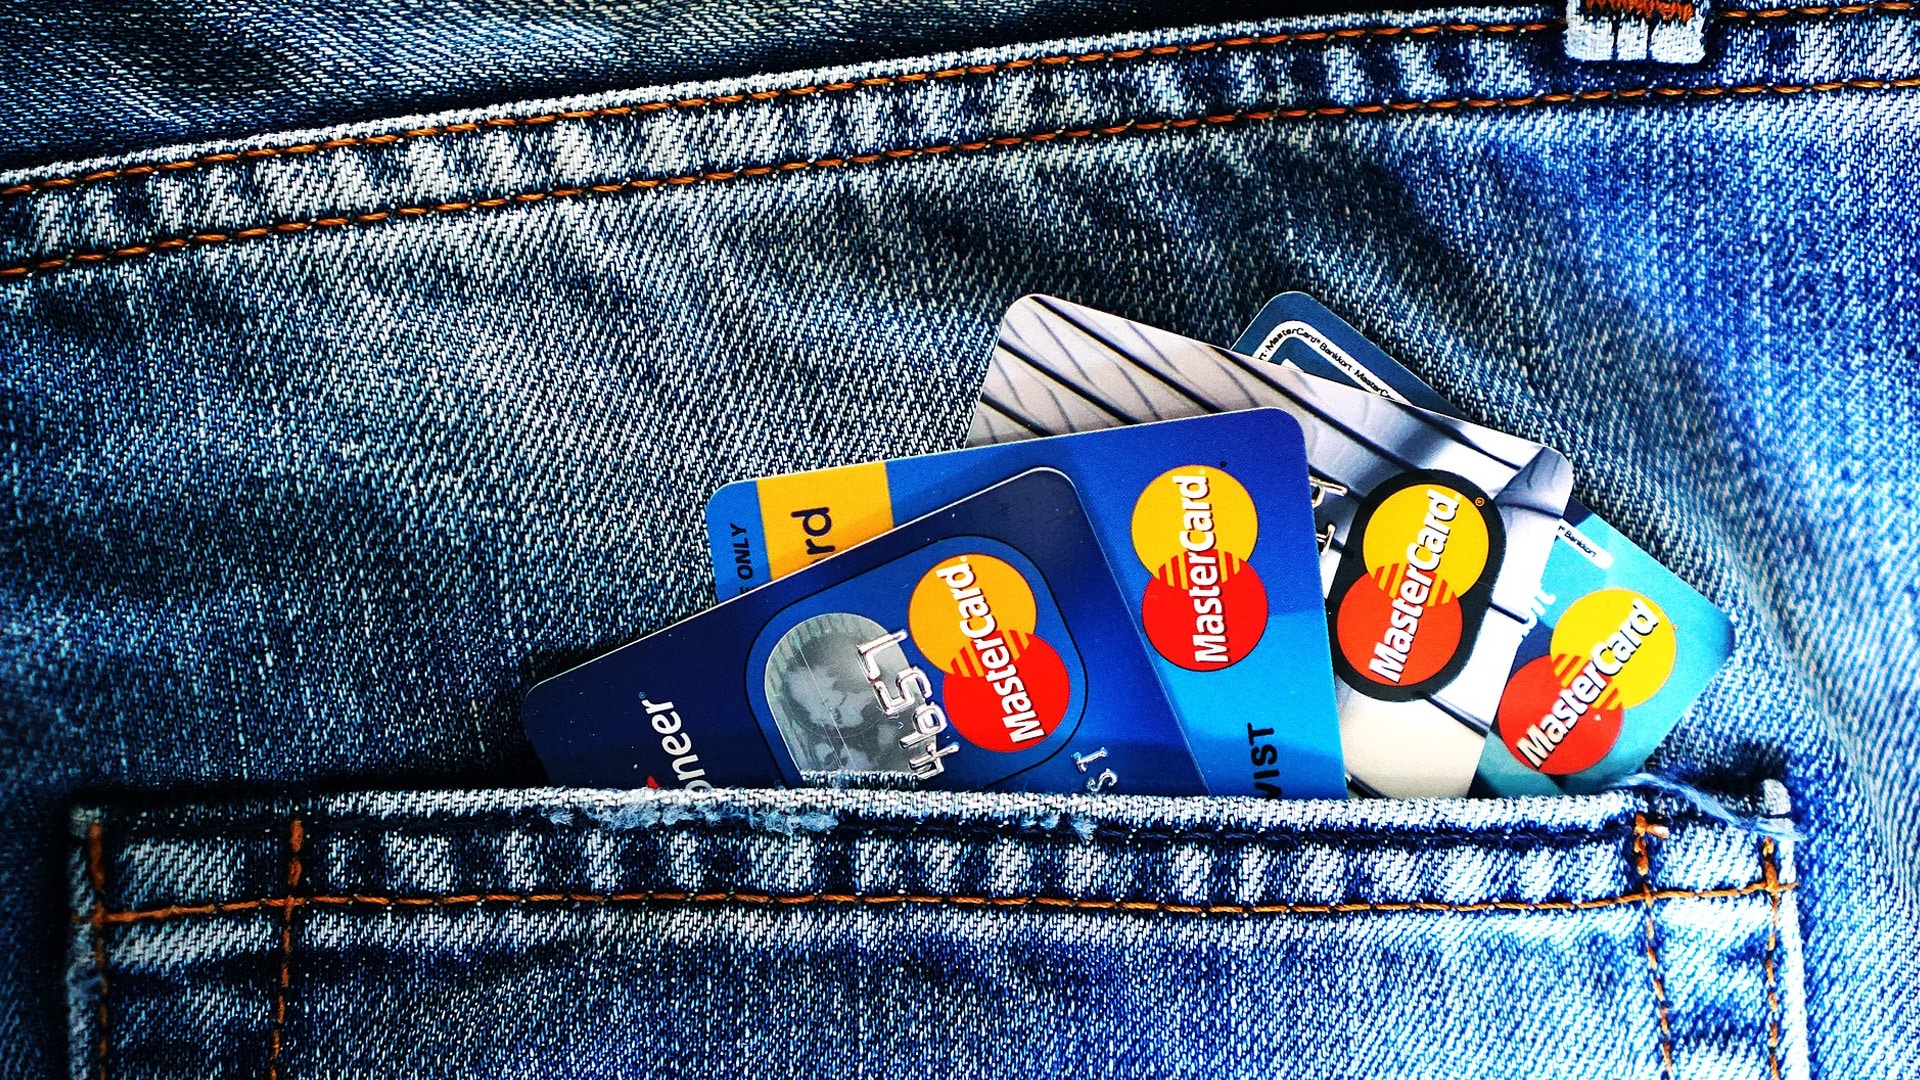 Fresh card issuance by 5 pvt banks to be impacted due to ban on Mastercard by RBI: Report